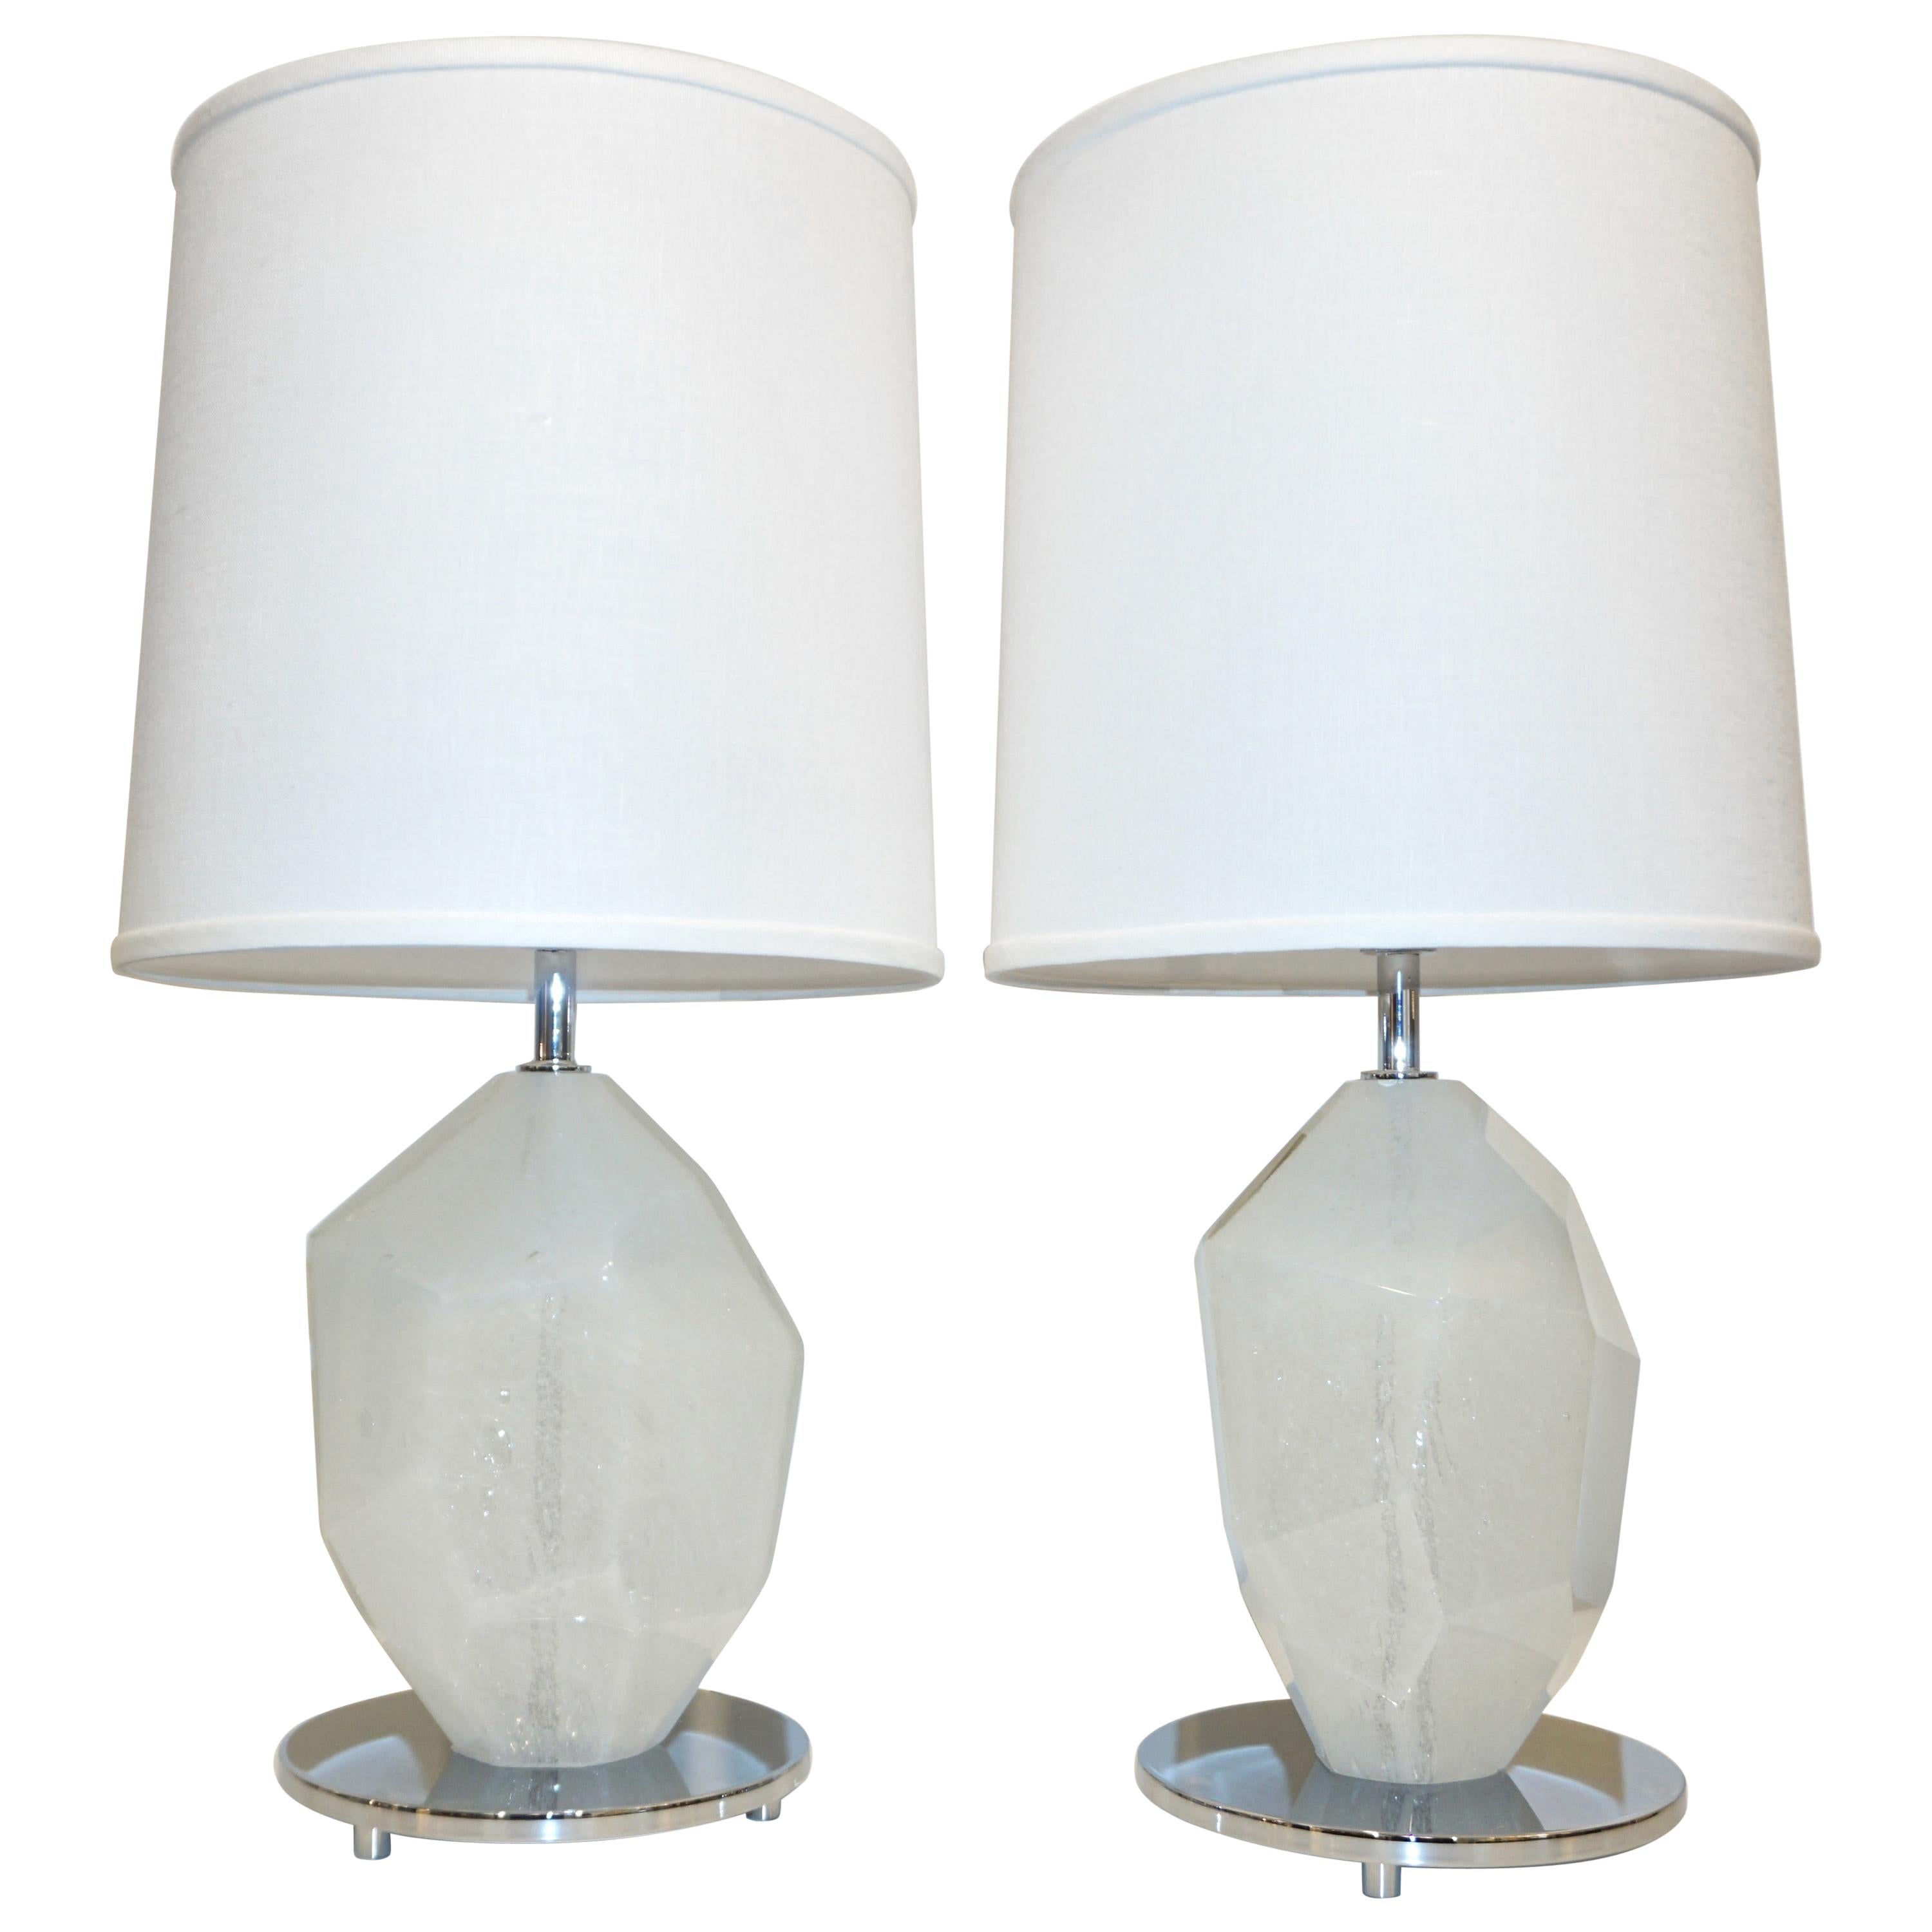 Donà Contemporary Italian Pair of Faceted Solid Rock White Murano Glass Lamps